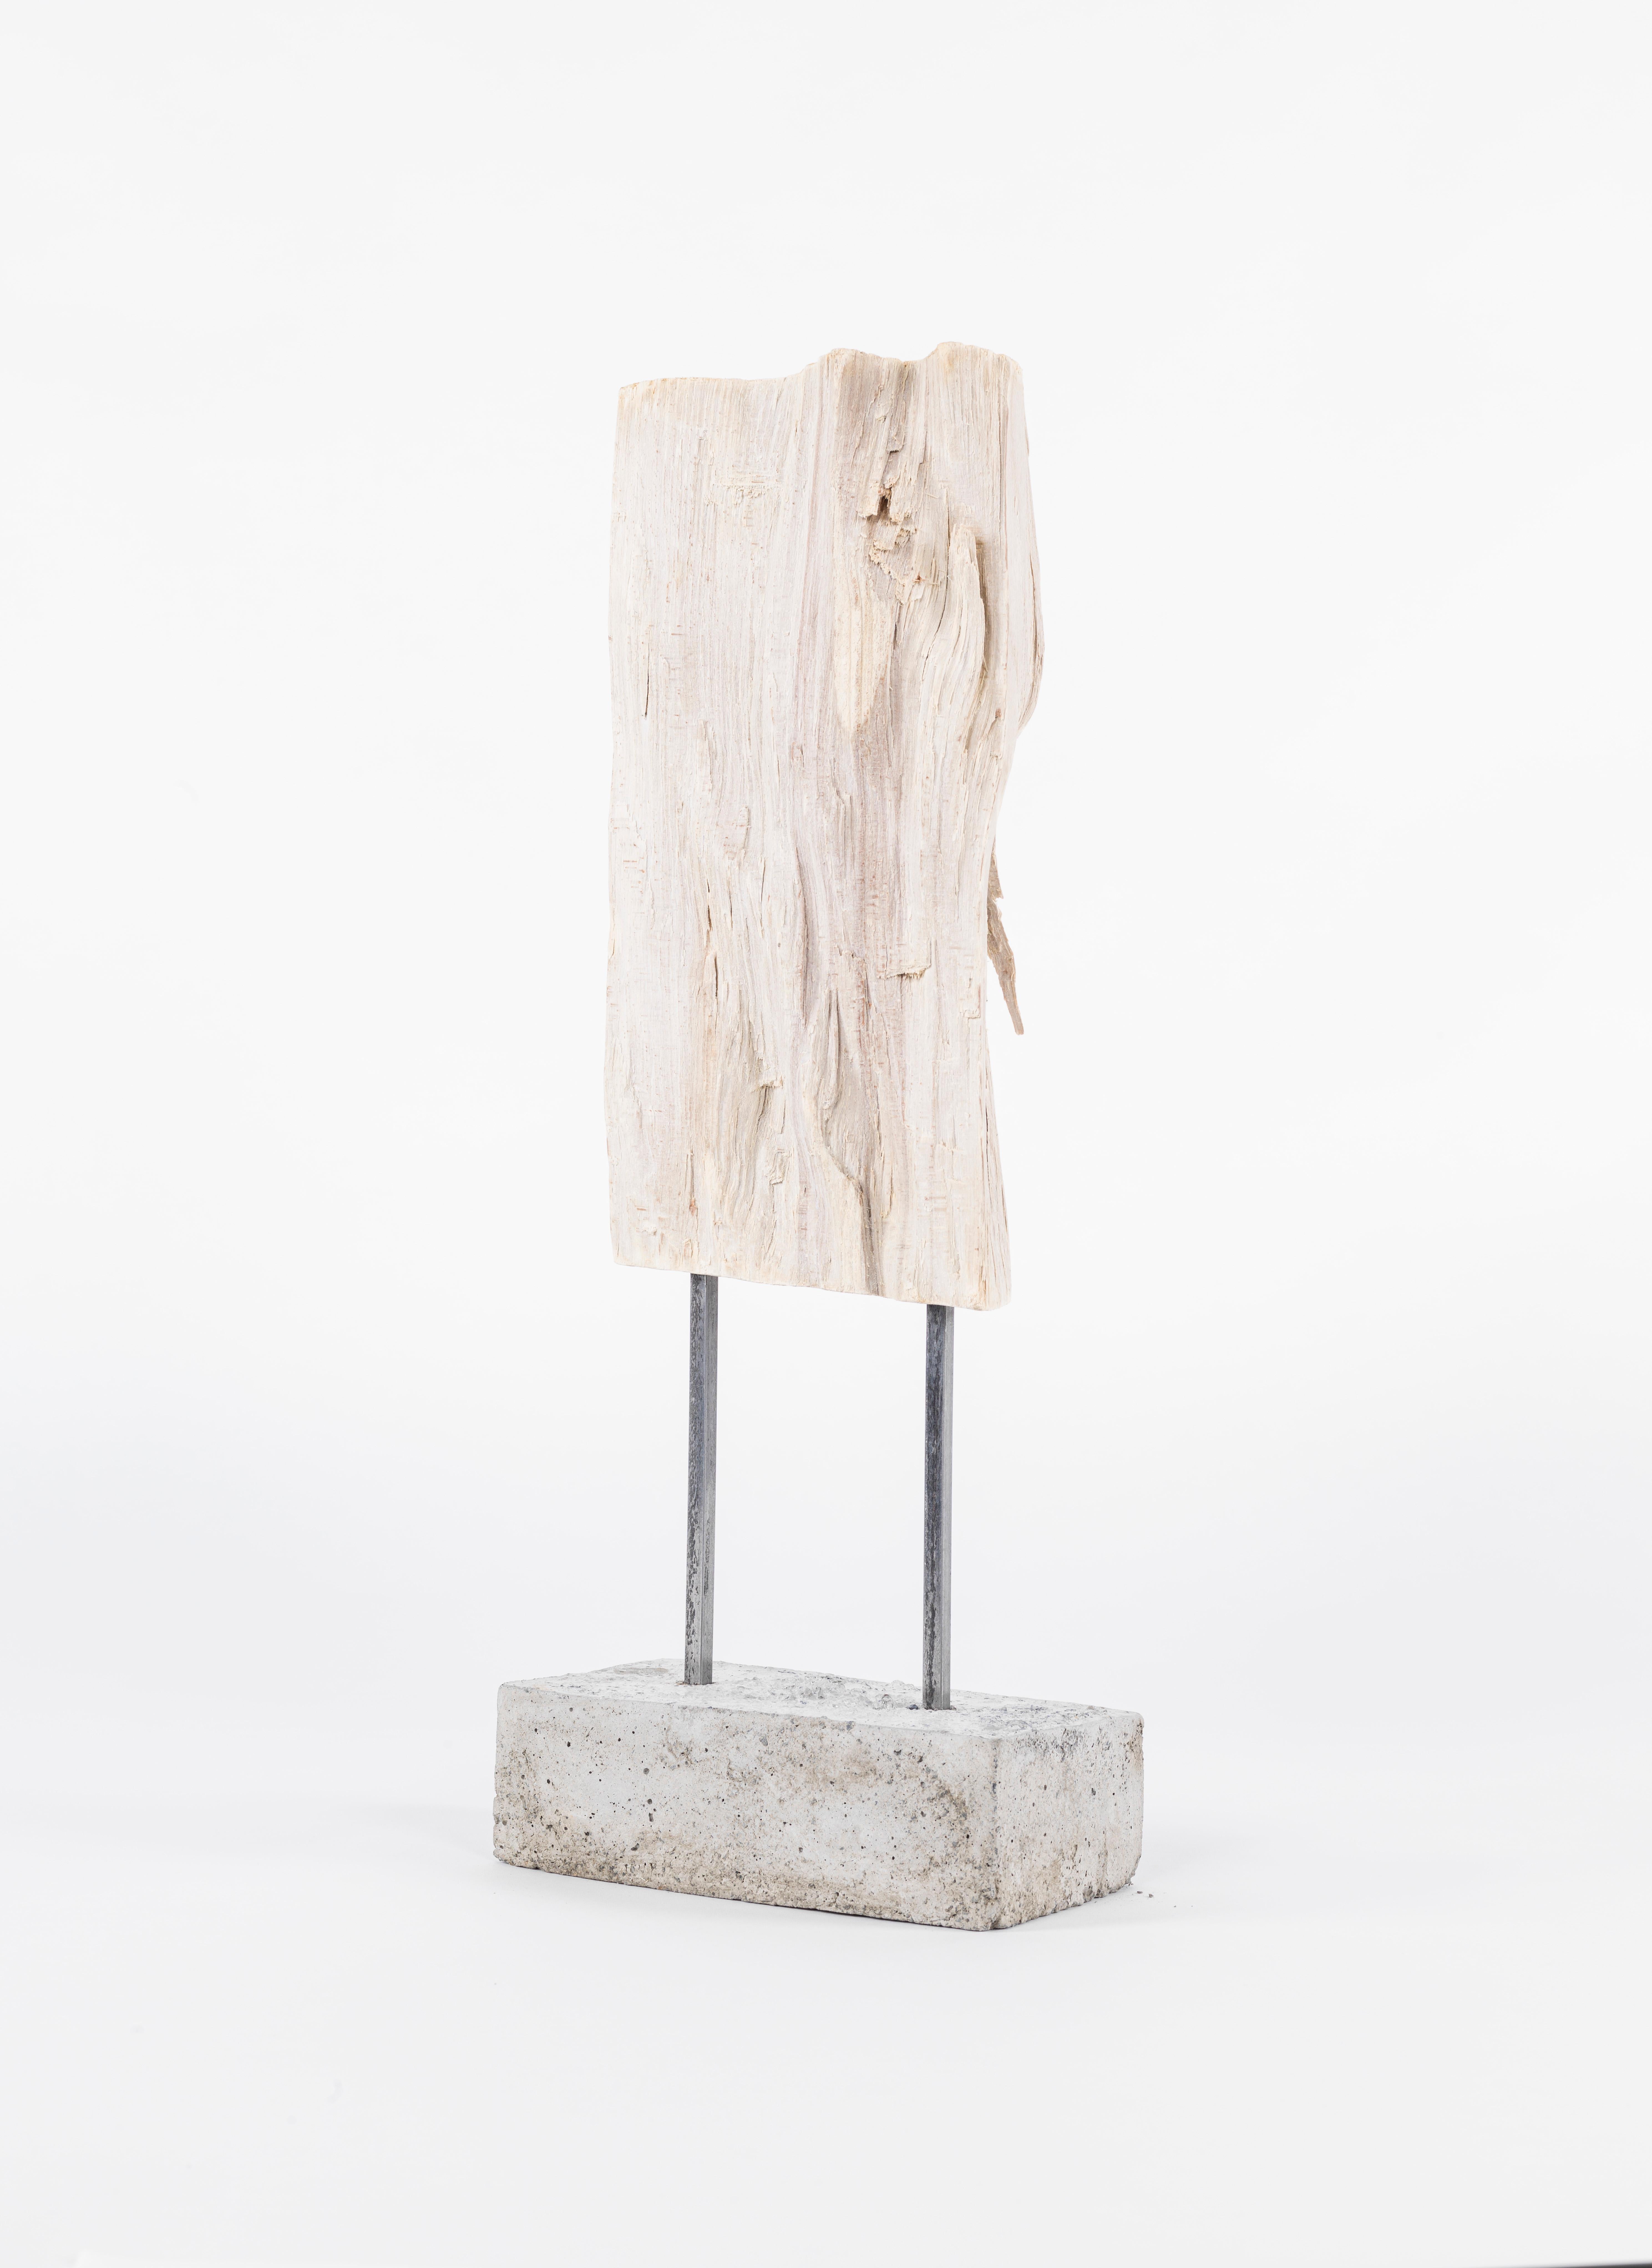 Discover our striking wood sculpture, part of an innovative series that reimagines discarded or destined-to-be burned wood. This unique piece showcases the beautiful combination of bleached oak, rectangular steel, and concrete. Meticulous